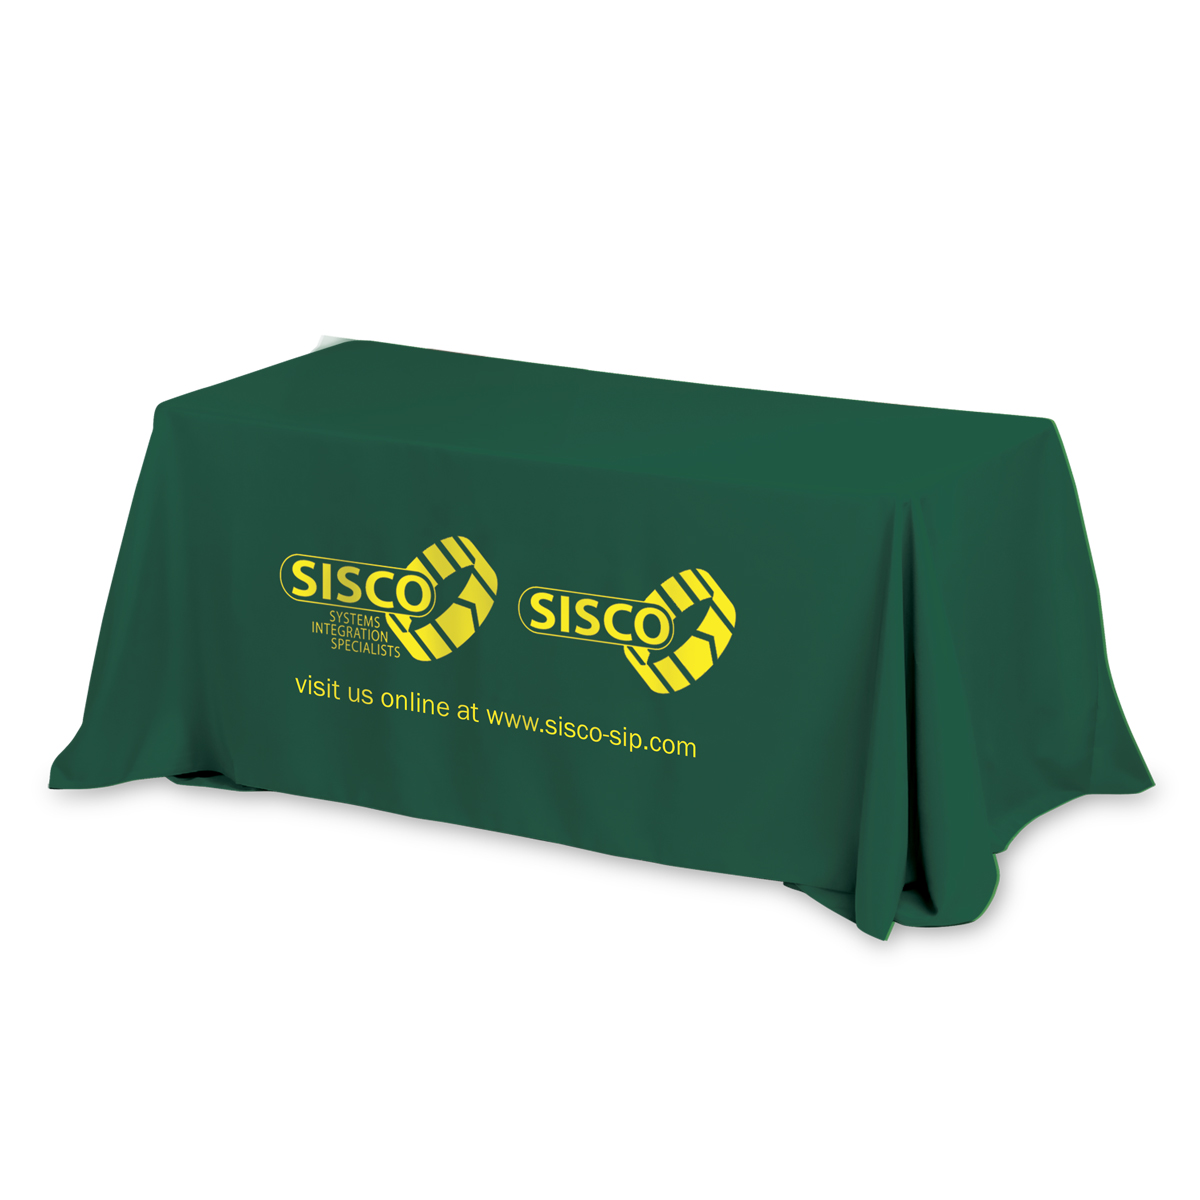 "Preakness Six" 3-Sided Economy Table Cover & Throws (Spot Colour Print) / Fits 6 ft Table